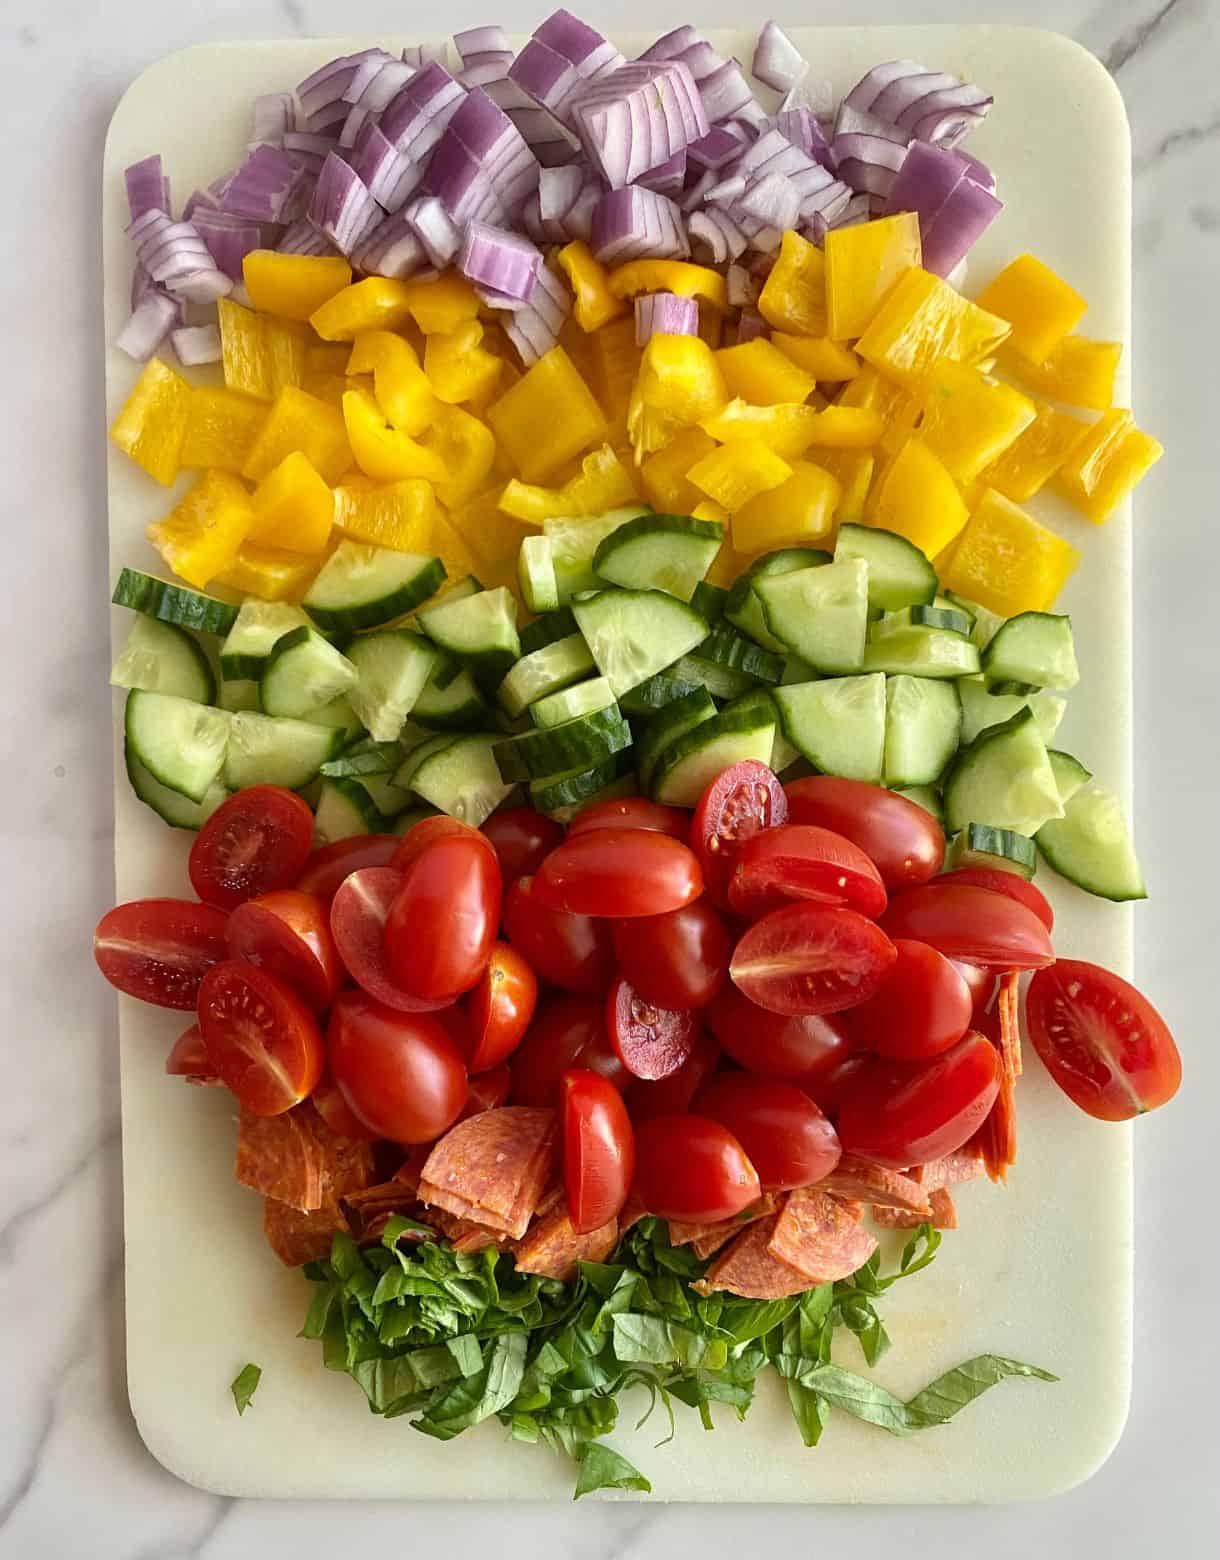 A cutting board with diced cucumbers, red onion, bell pepper, halved tomatoes and shredded basil.